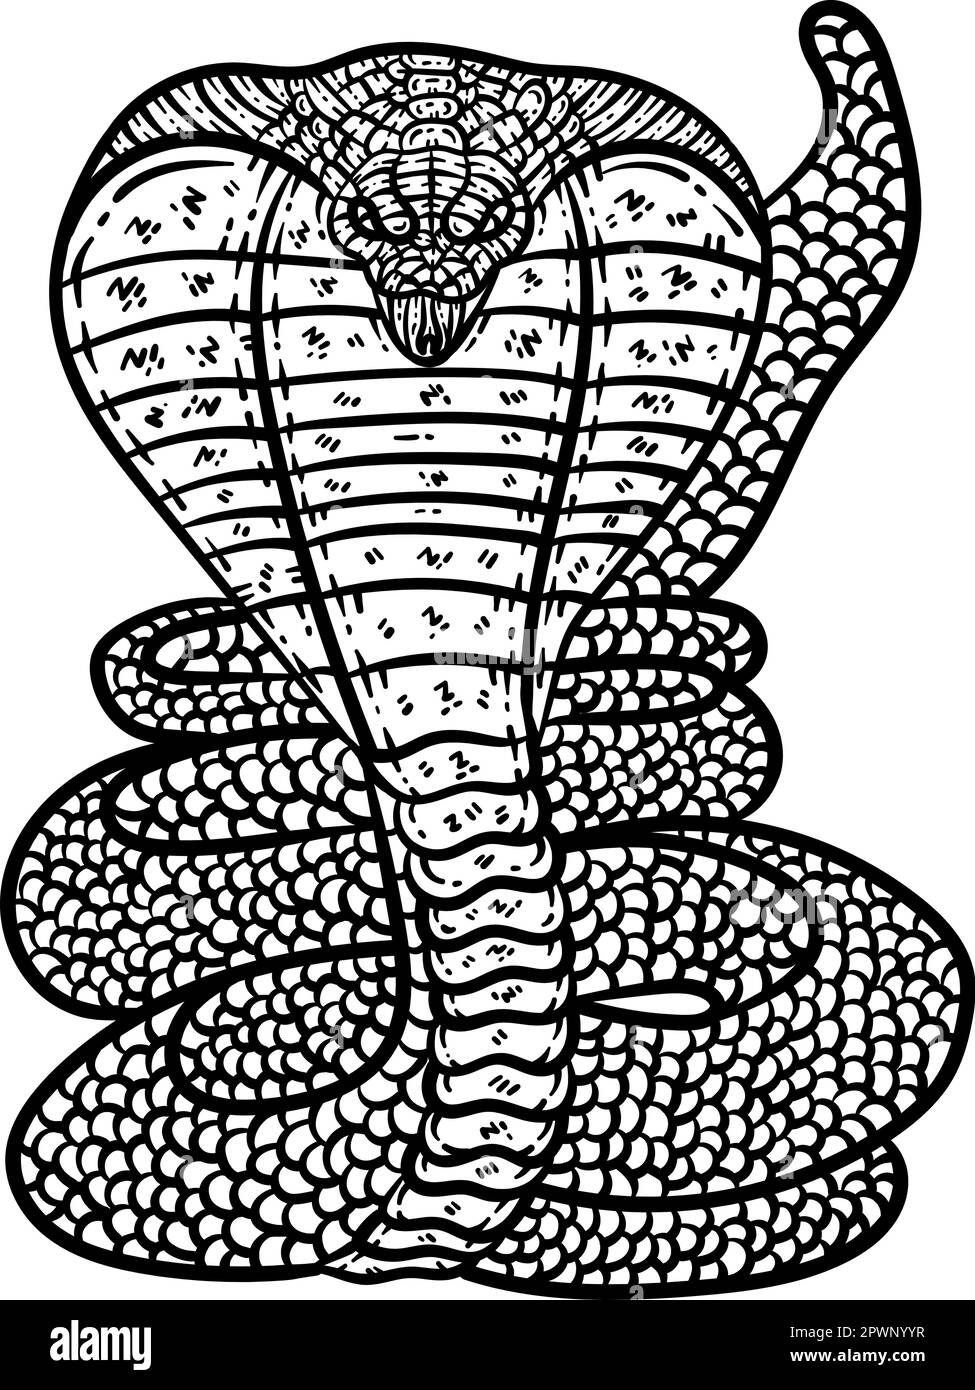 Cobra Animal Coloring Page for Adults Stock Vector